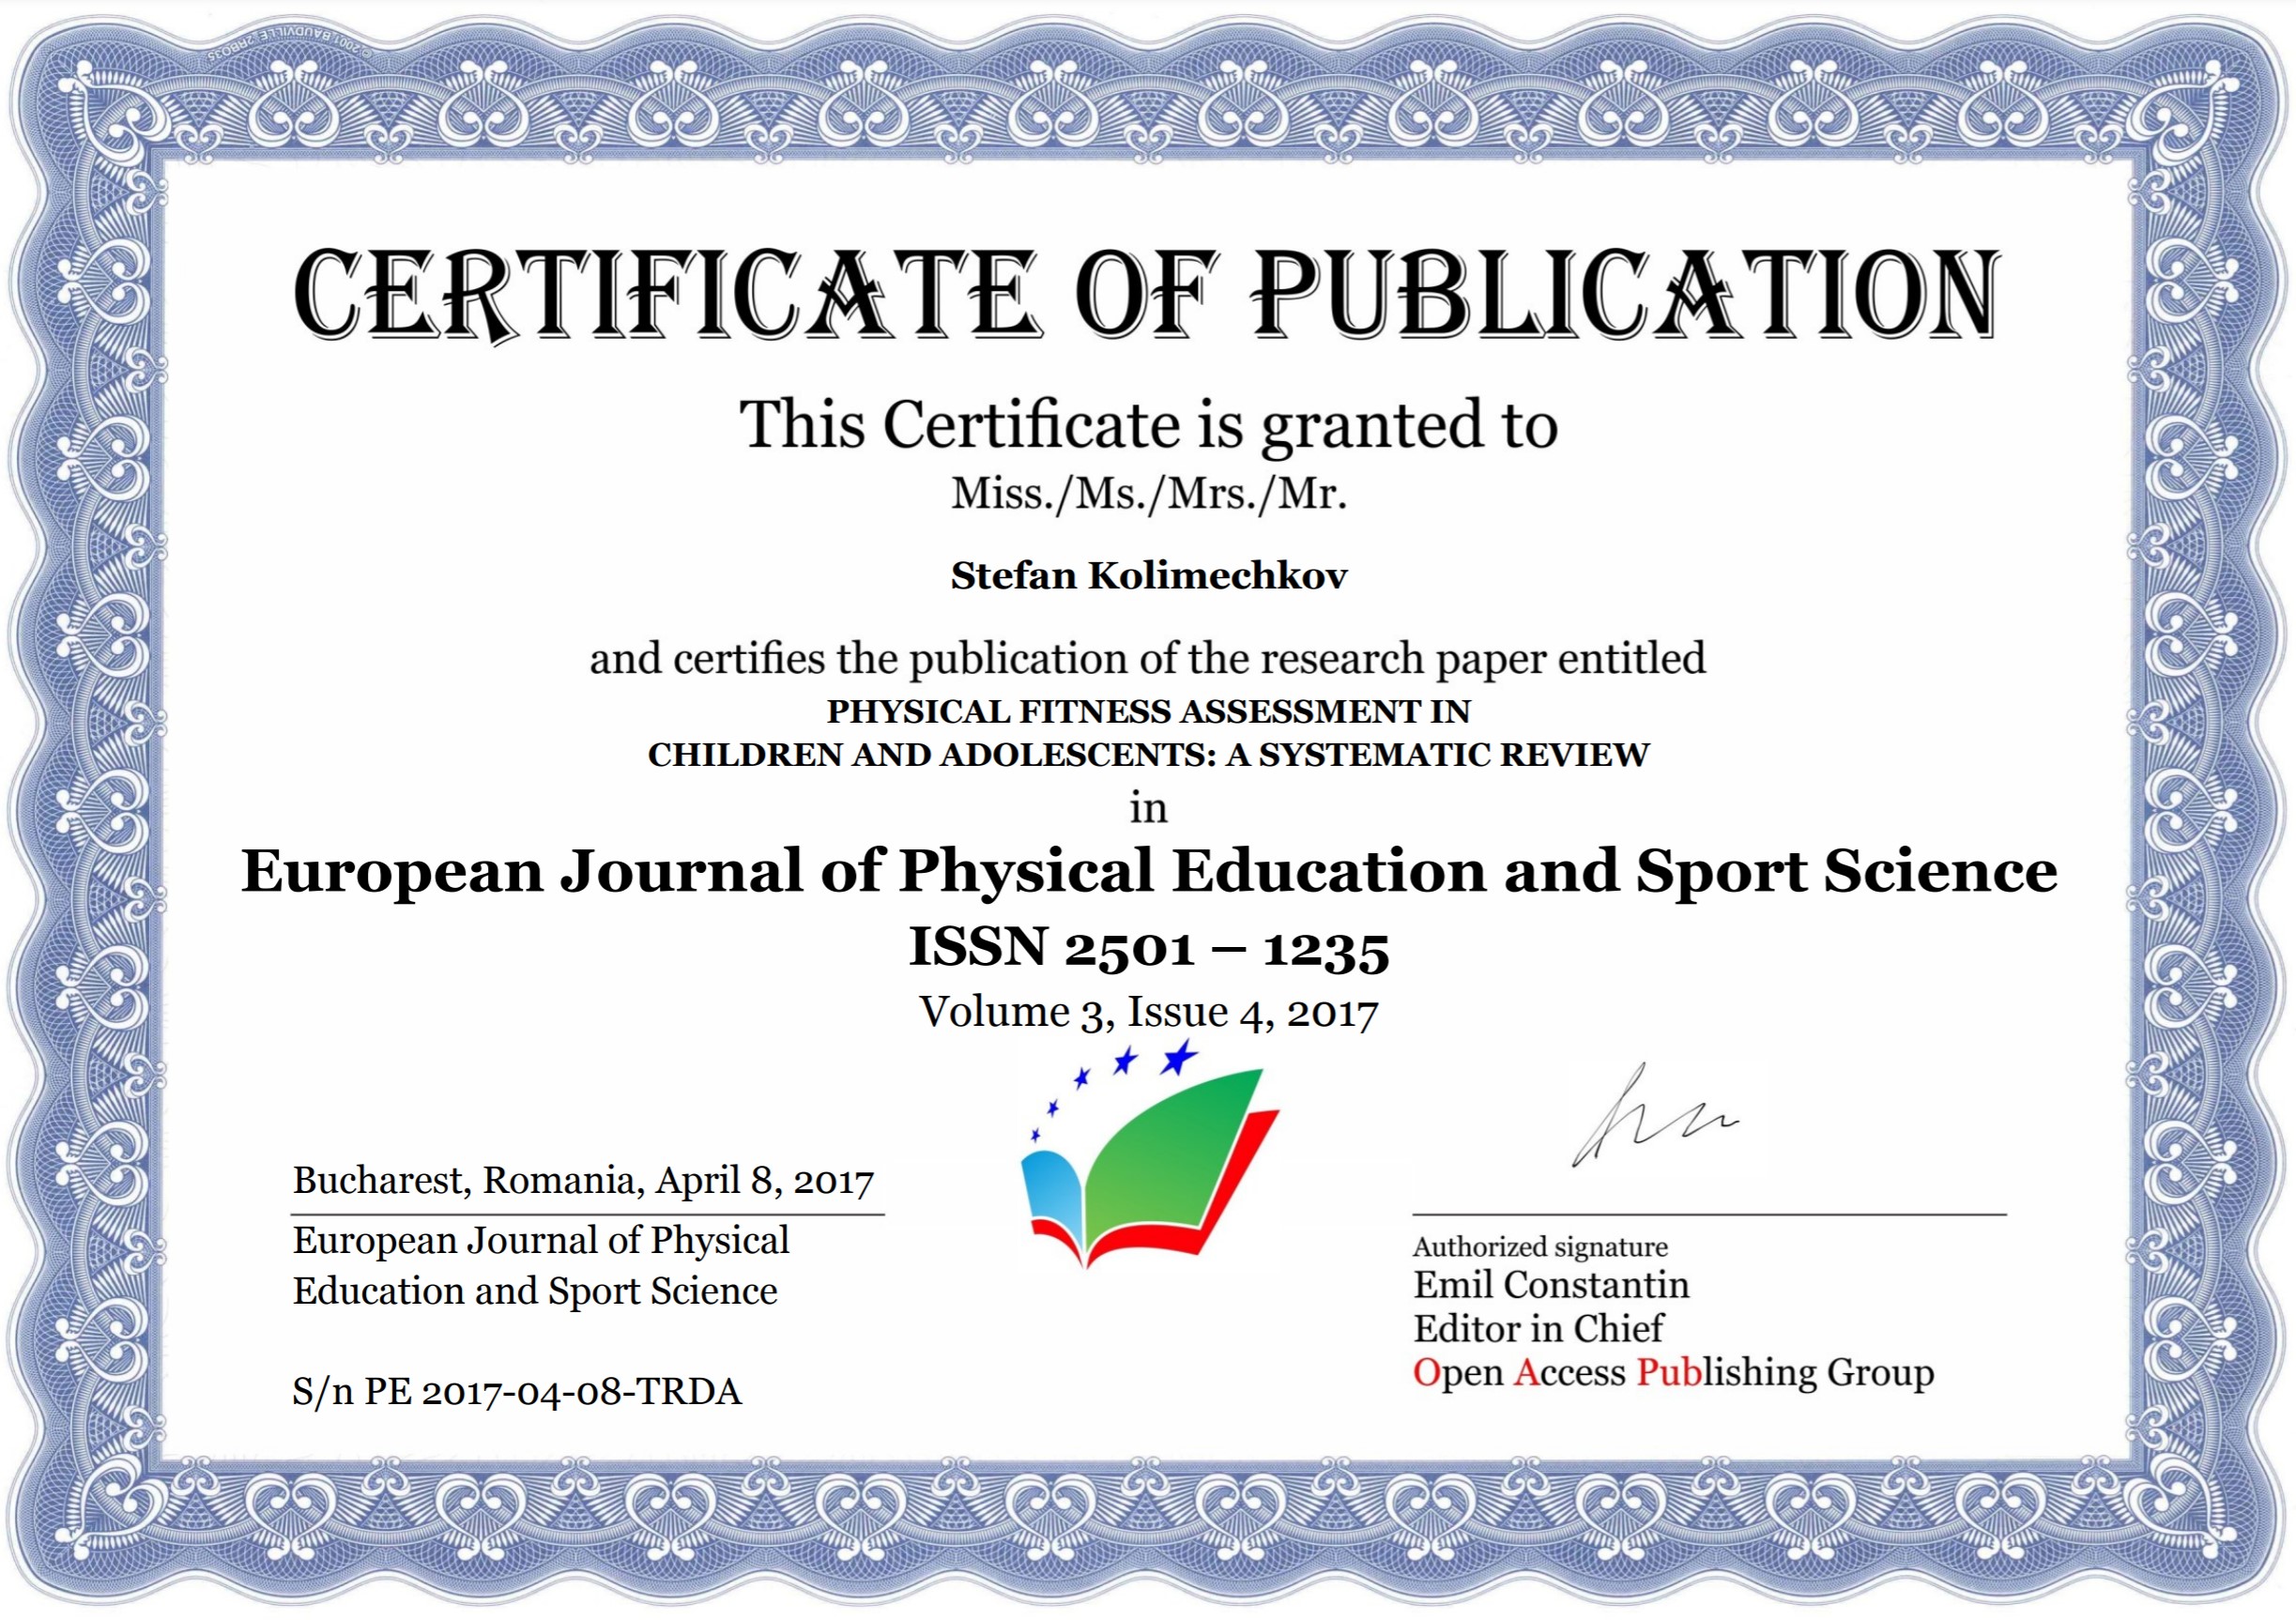 Physical fitness assessment in children and adolescents: a systematic review - Certificate of Publication